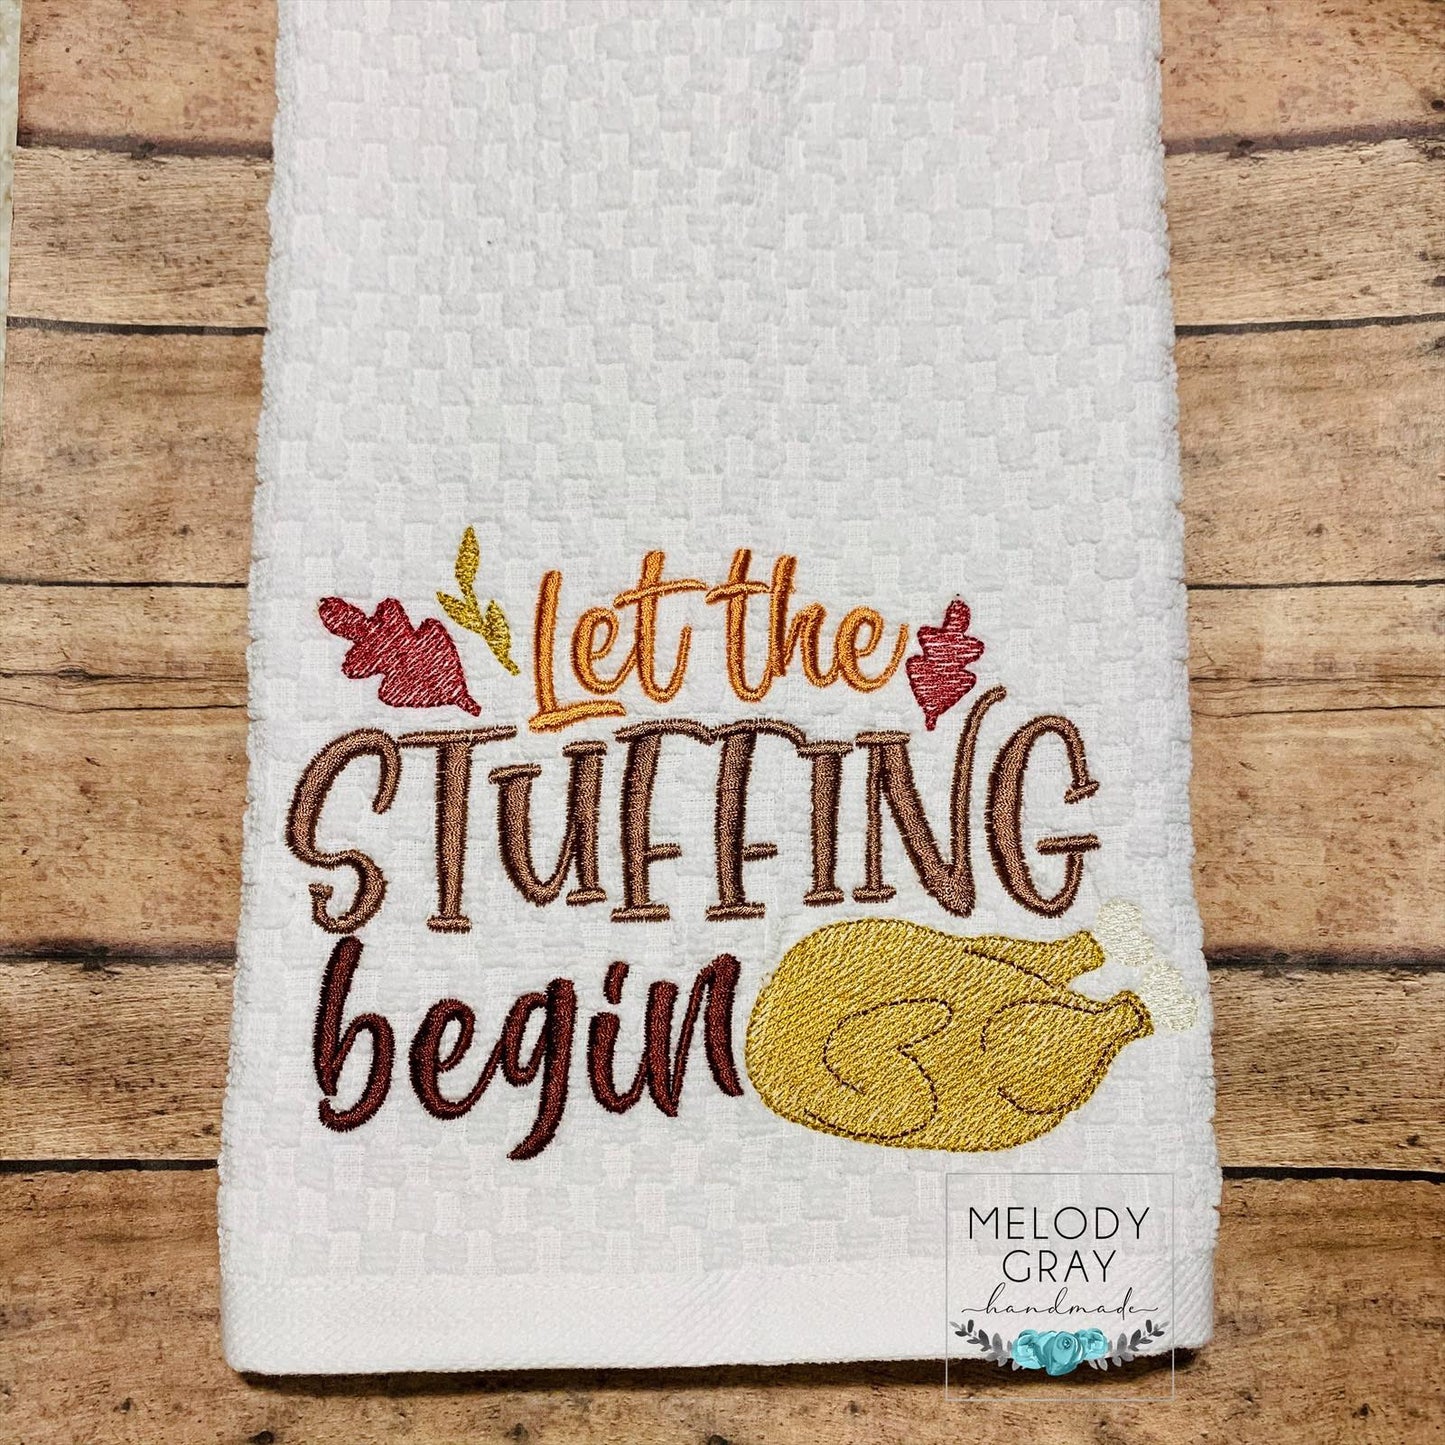 Let The Stuffing Begin - 2 Sizes - Digital Embroidery Design